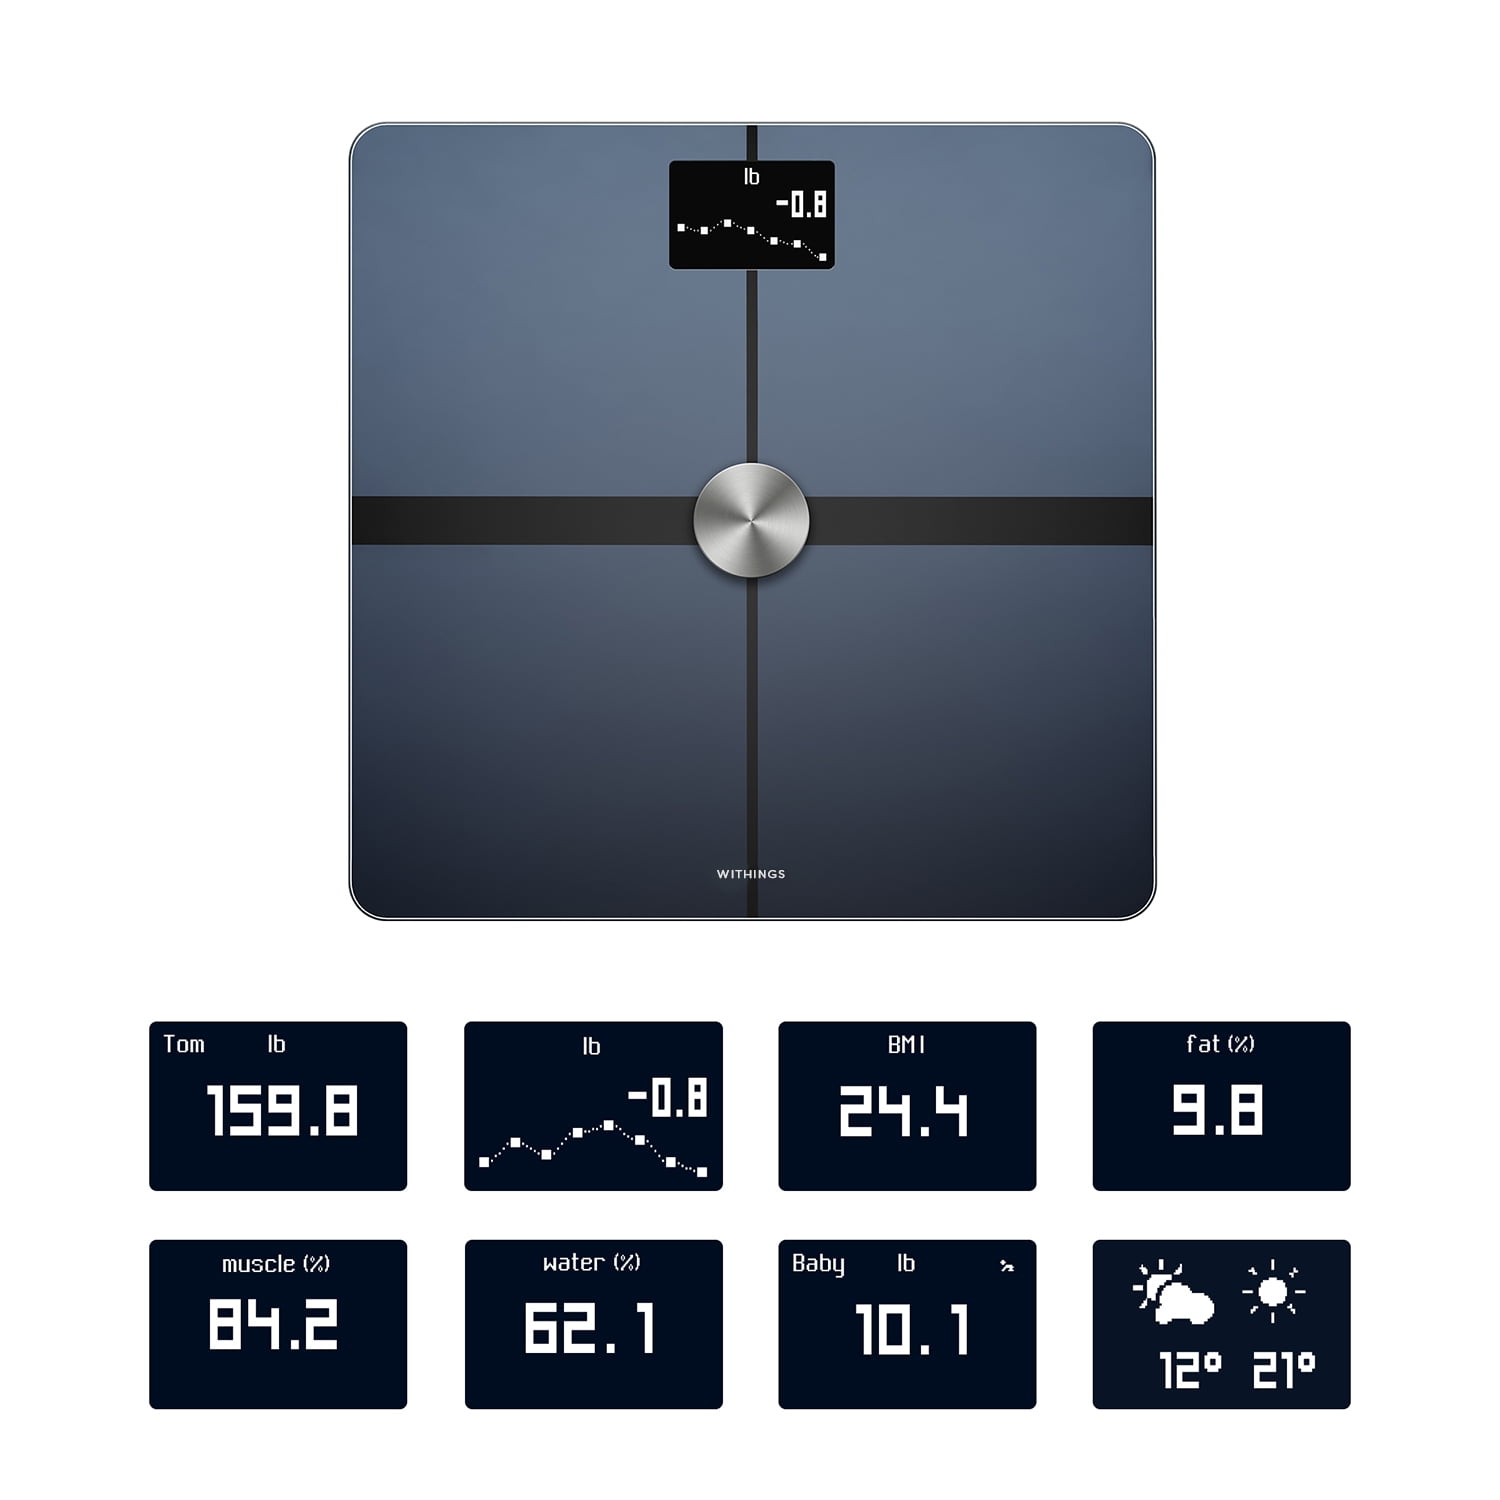  Withings Body+ Wi-Fi bathroom scale for Body Weight - Digital  Scale and Smart Monitor Incl. Body Composition Scales with Body Fat and  Weight loss management : Health & Household